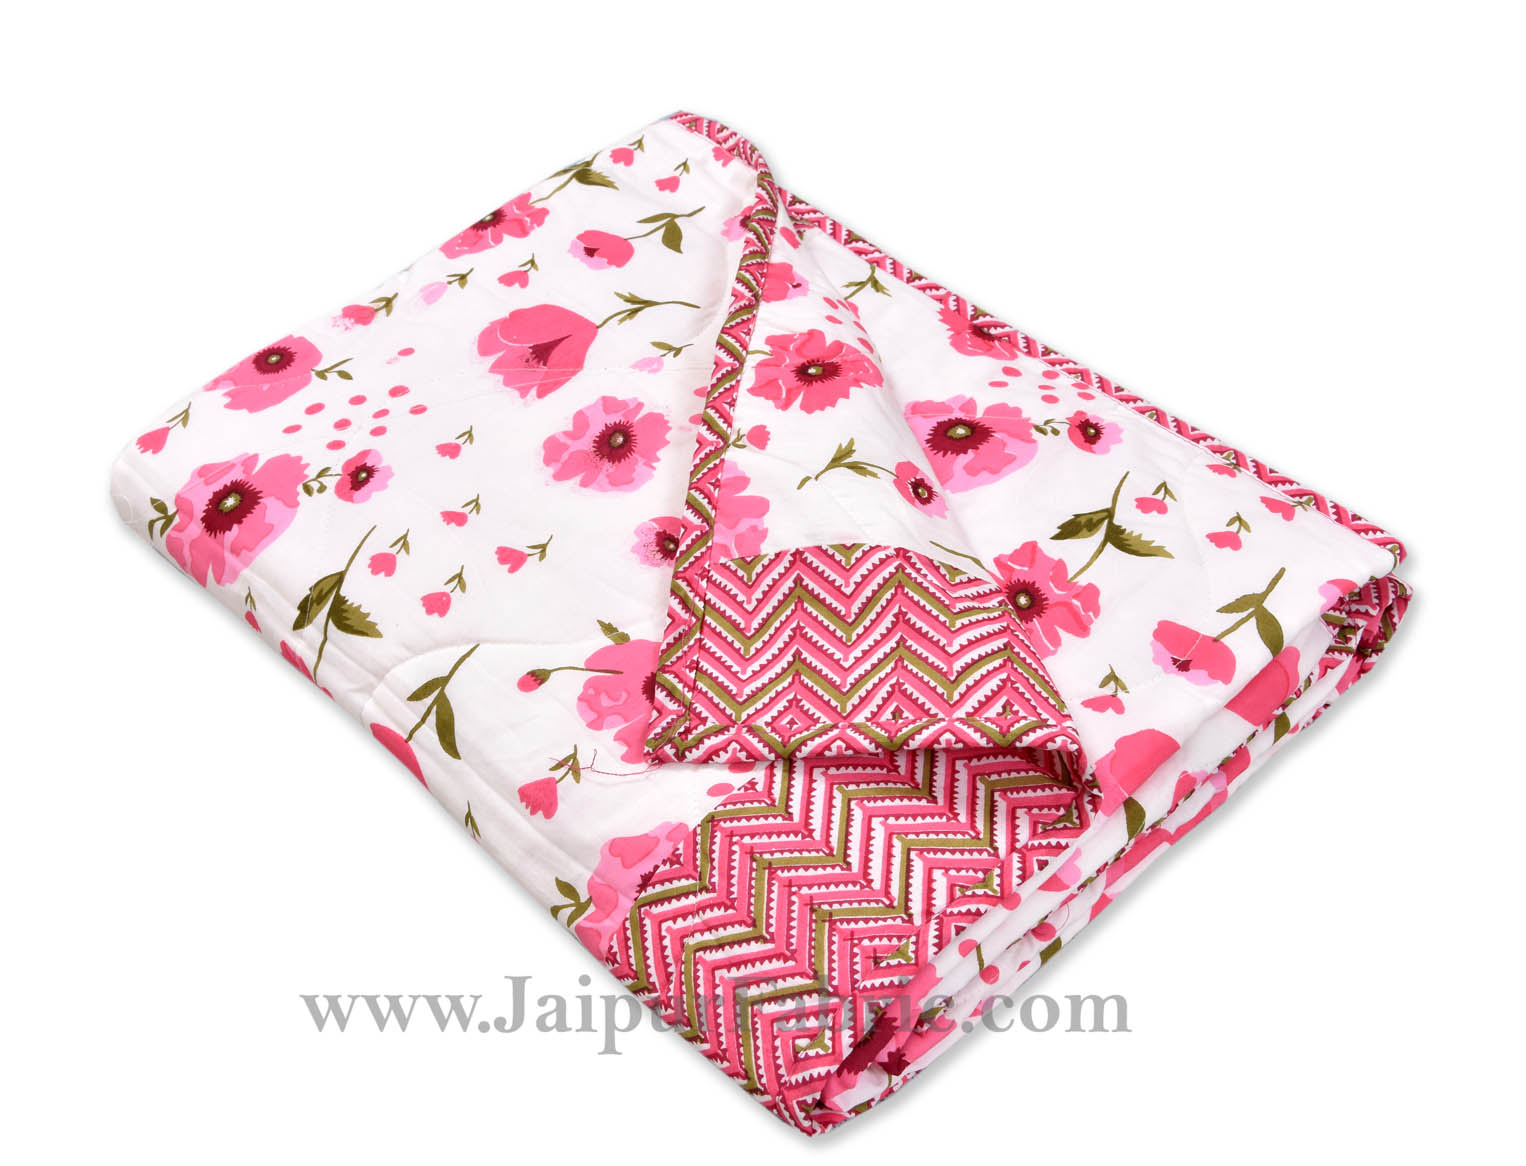 Baby Blanket New Born Pink & White Crib Comforter Toddler Baby Quilt Soft Cute Kids Quilt 120 x 120 cm Multi color